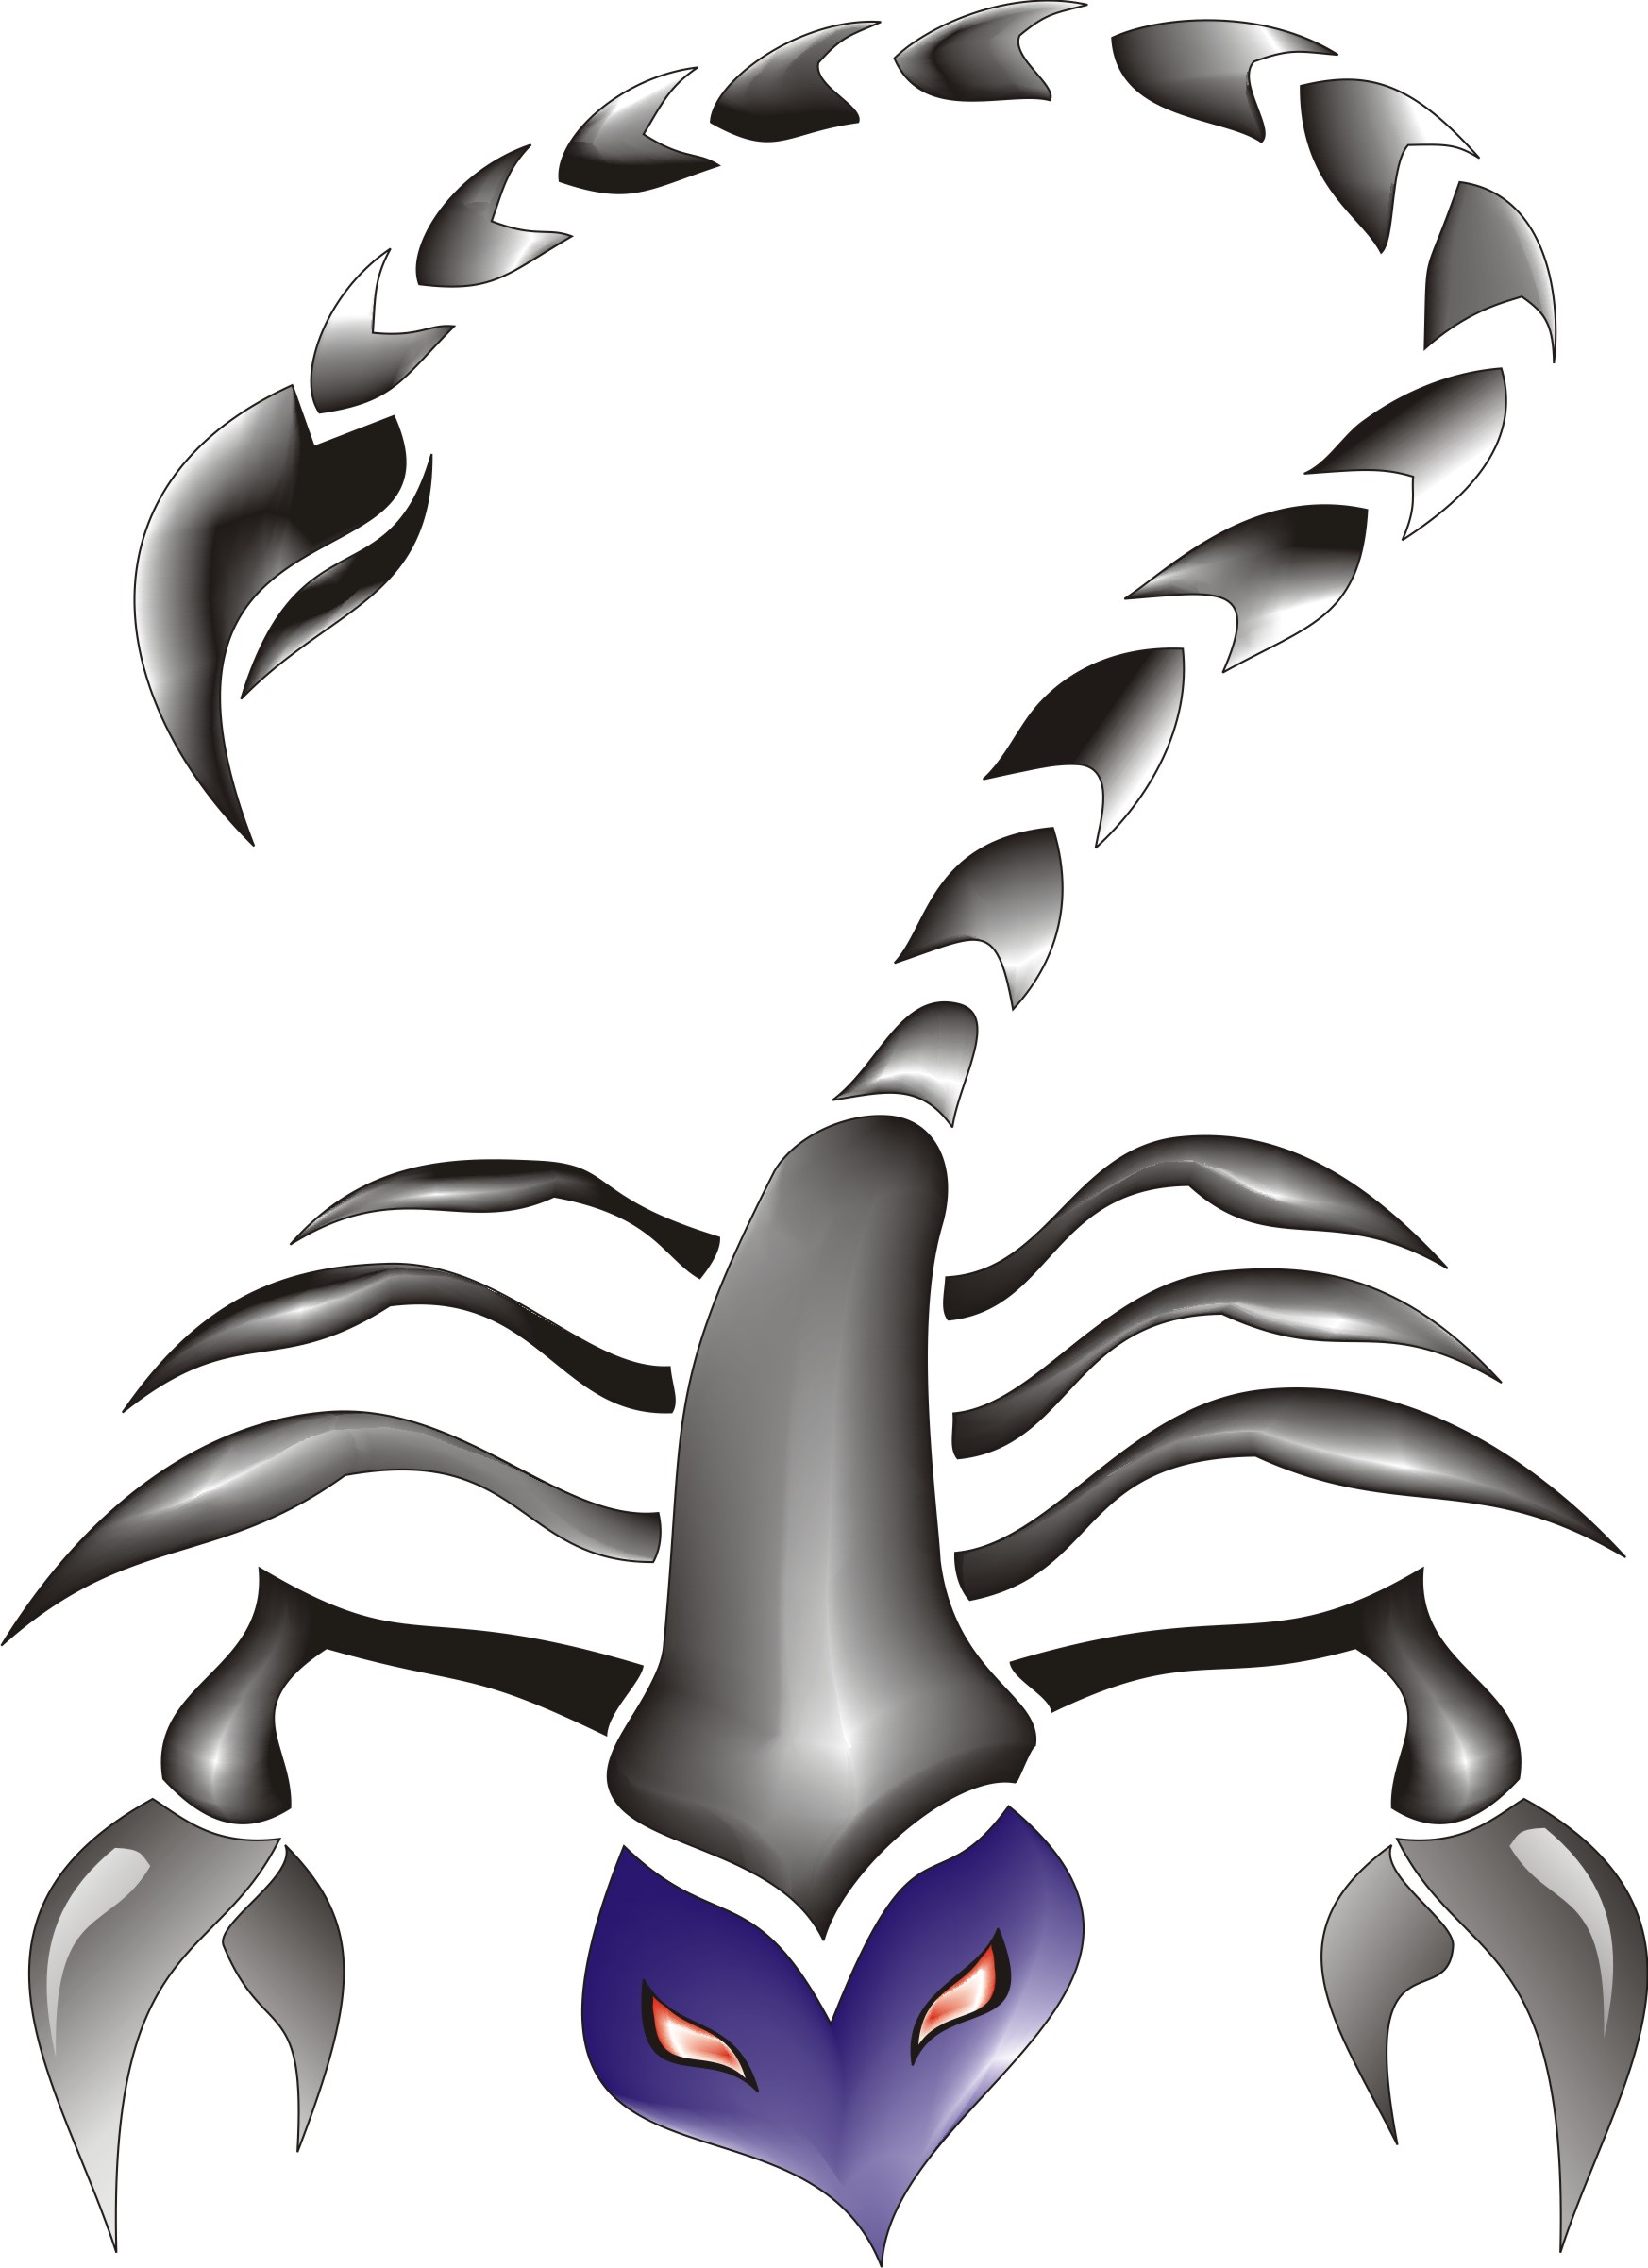 Scorpion King | Free Images at Clker.com - vector clip art online